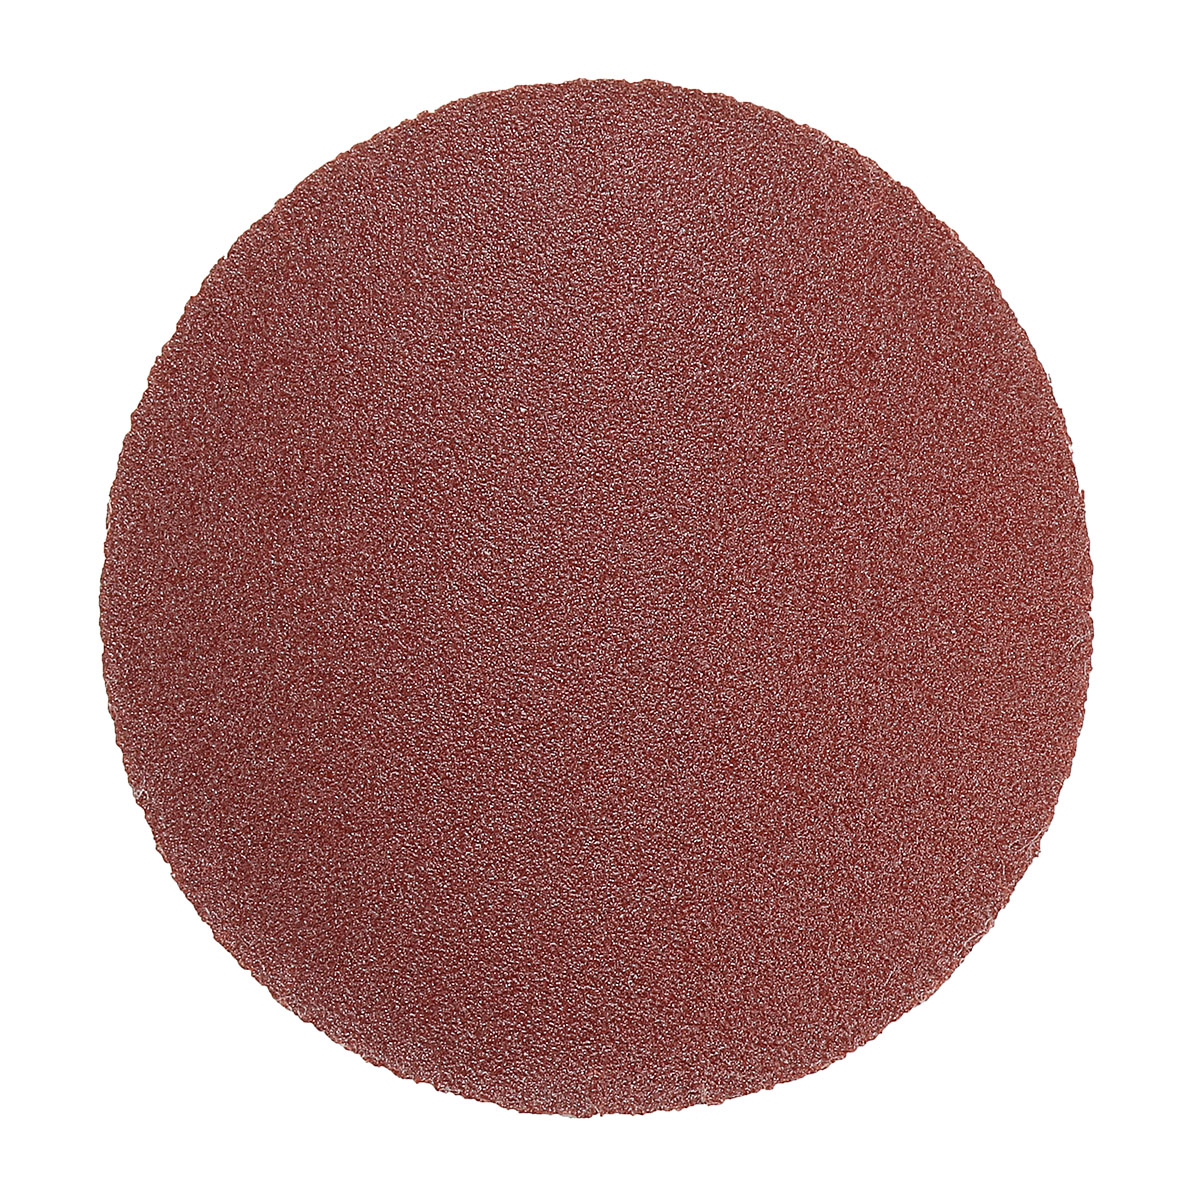 60pcs 3 Inch 60/80/120 Grit Sandpaper with 75mm Hand Polishing Pad for Polishing Abrasive Tools